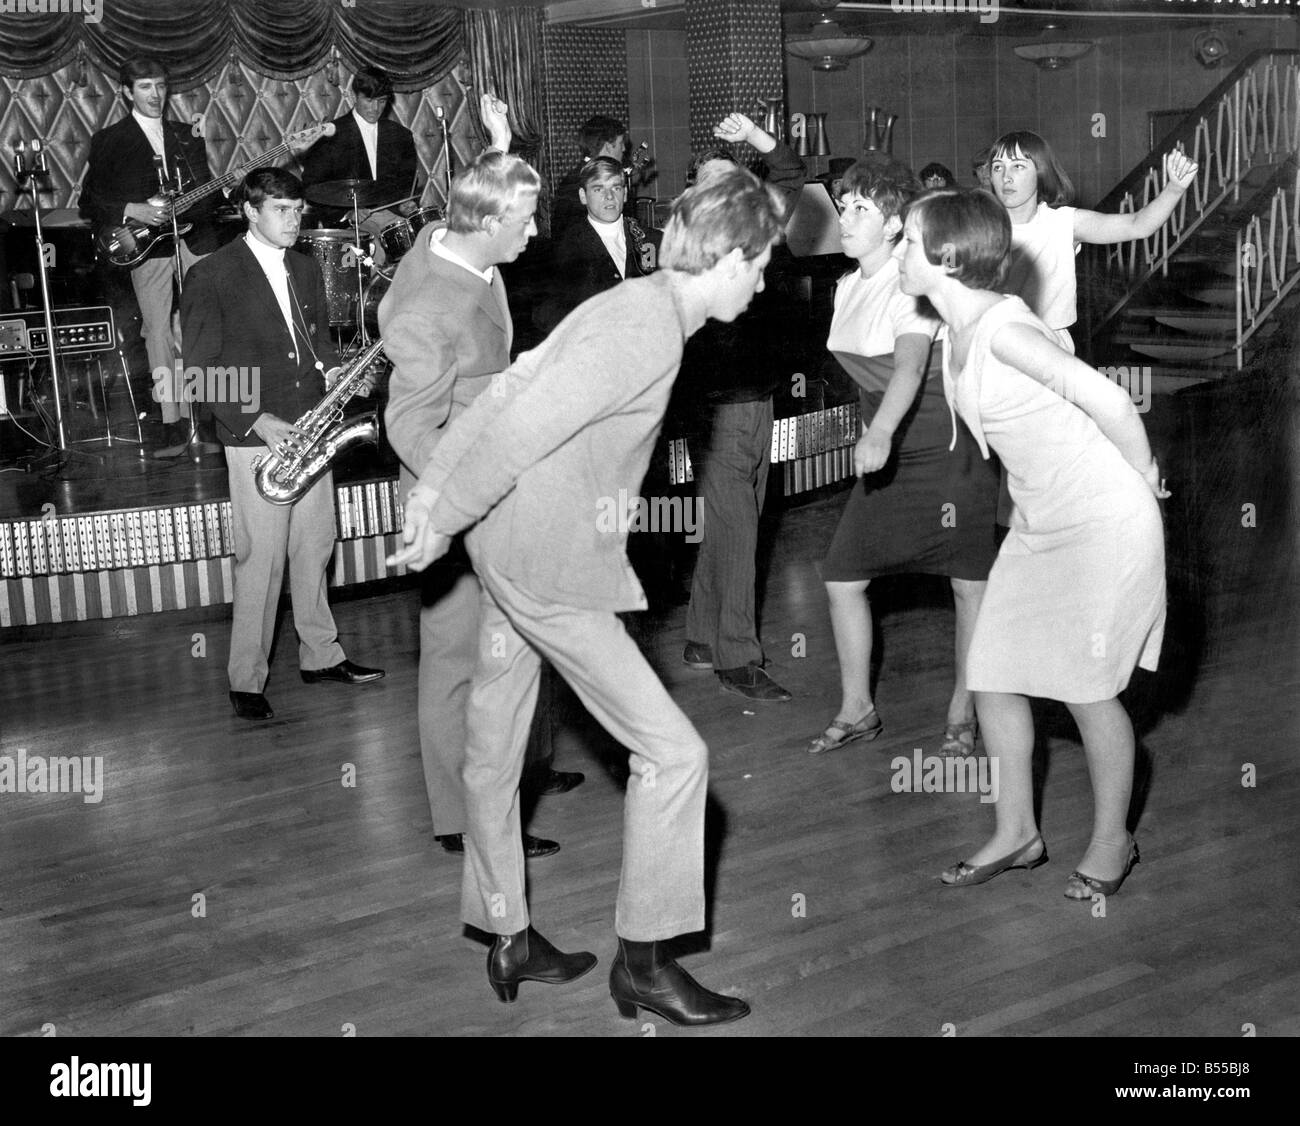 Entertainment: Dance: The Prince Philip. Young mods-hands clasped behind their backs like Prince Philip-dance The Blues at Basildon, Essex. August 1963 P012717 Stock Photo